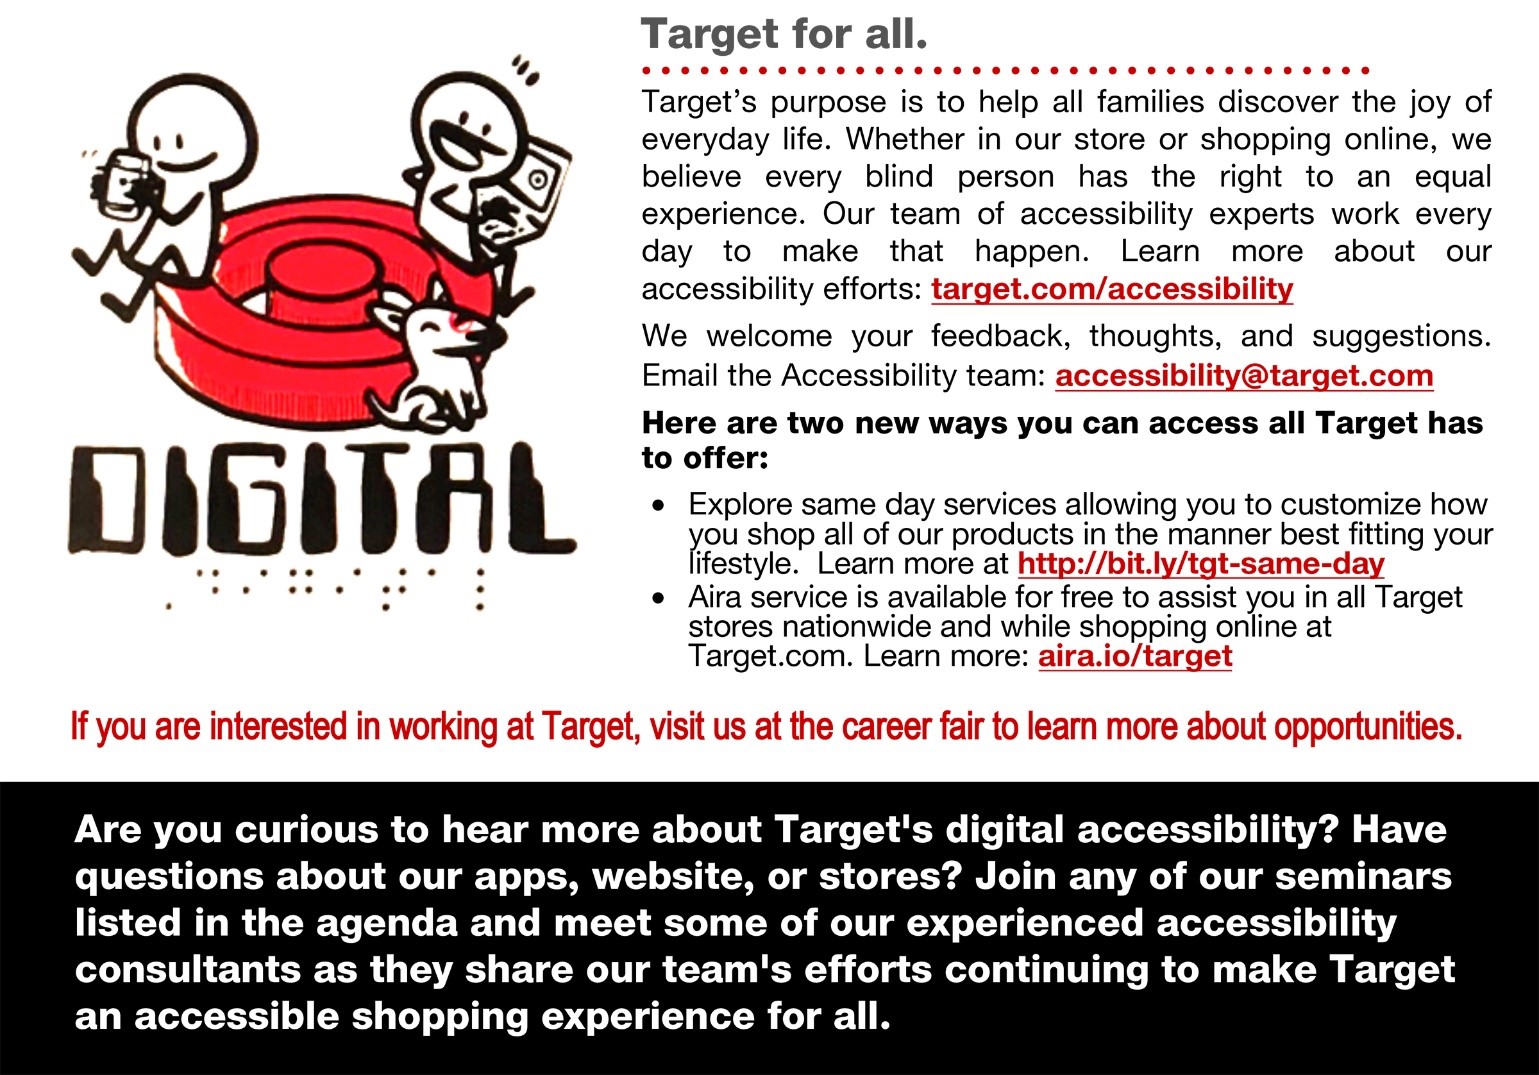 Target’s purpose is to help all families discover the joy of everyday life. Whether in our store or shopping online, we believe every blind person has the right to an equal experience. Our team of accessibility experts work every day to make that happen. Learn more about our accessibility efforts: target.com/accessibility. We welcome your feedback, thoughts, and suggestions. Email the Accessibility team: accessibility@target.com. Here are two new ways you can access all Target has to offer: •	Explore same day services allowing you to customize how you shop all of our products in the manner best fitting your lifestyle. Learn more at http://bit.ly/tgt-same-day  •	Aira service is available for free to assist you in all Target stores nationwide and while shopping online at Target.com. Learn more: aira.io/target If you are interested in working at Target, visit us at the career fair to learn more about opportunities. Are you curious to hear more about Target's digital accessibility? Have questions about our apps, website, or stores? Join any of our seminars listed in the agenda and meet some of our experienced accessibility consultants as they share our team's efforts continuing to make Target an accessible shopping experience for all.